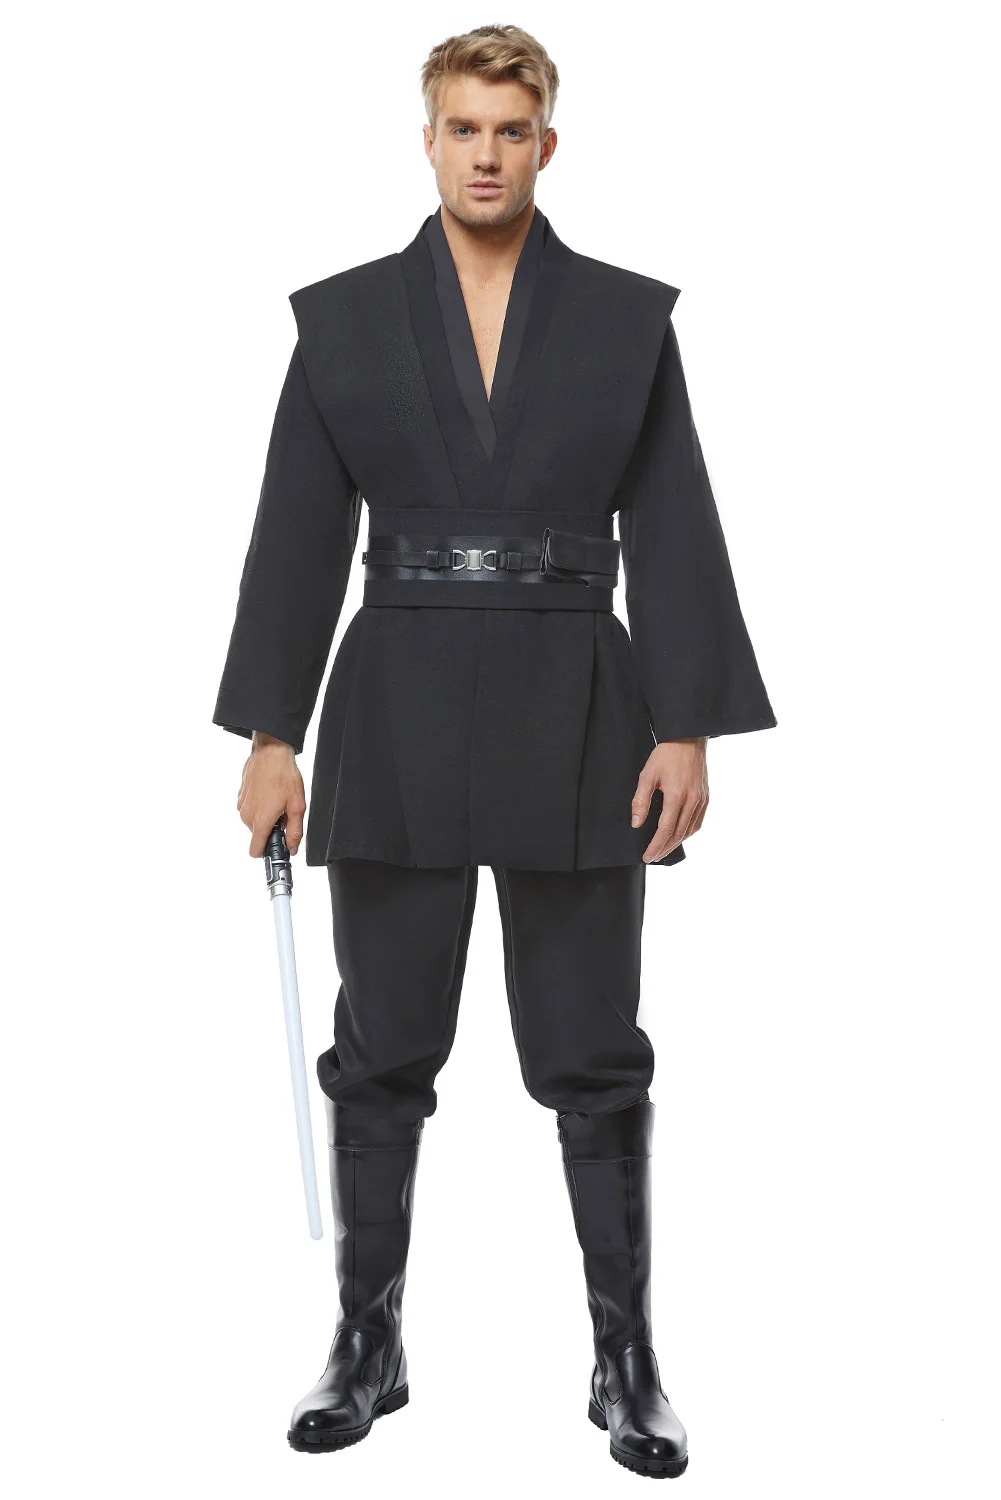 Star Wars Revenge of the Sith Anakin Skywalker Cosplay Costume Black Outfit Suit 